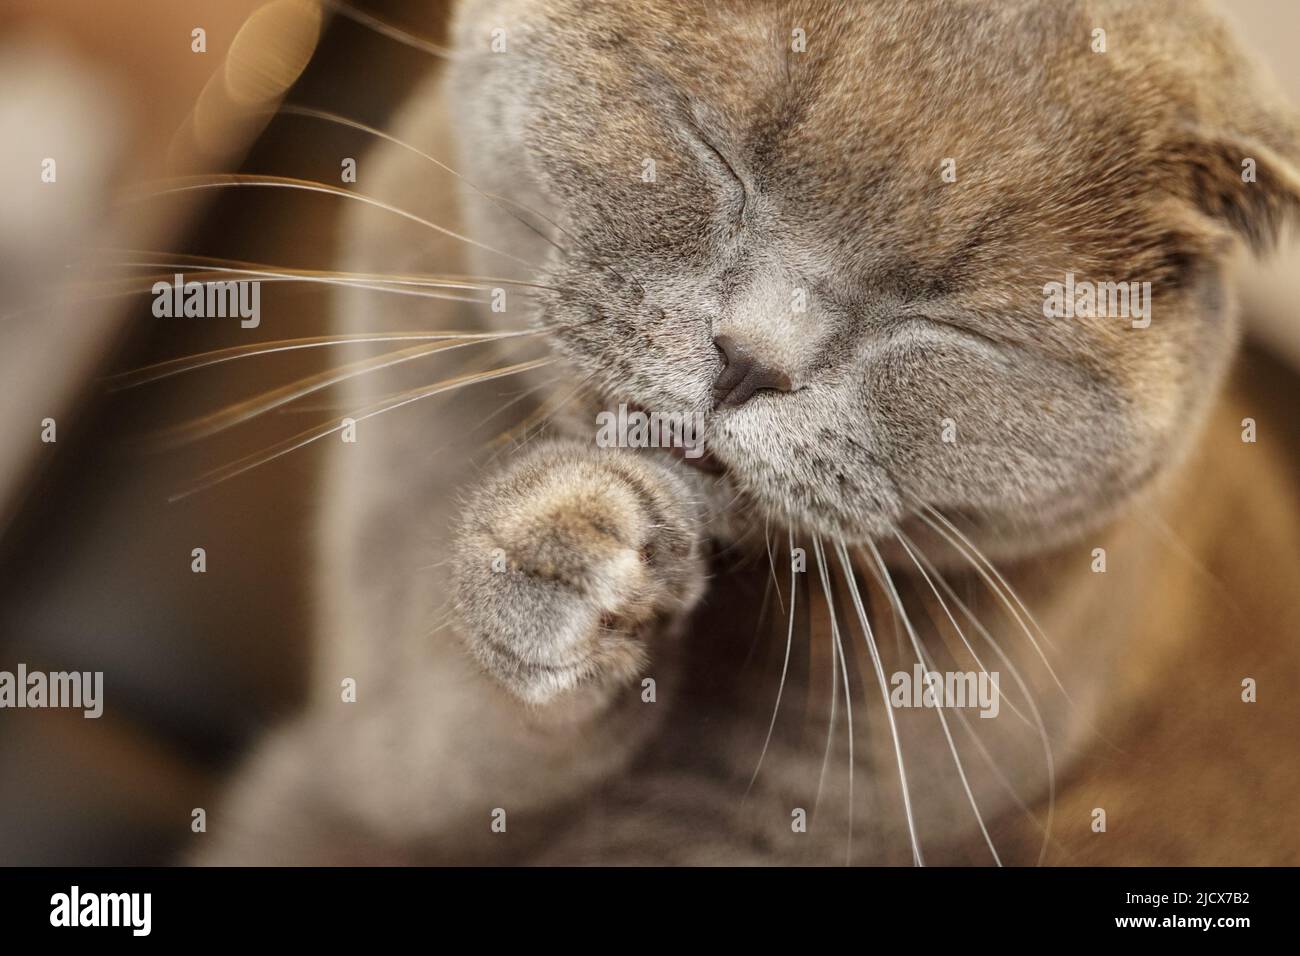 Cute scottish fold cat cleaning her fur with tongue close up view with shallow depth of field Stock Photo